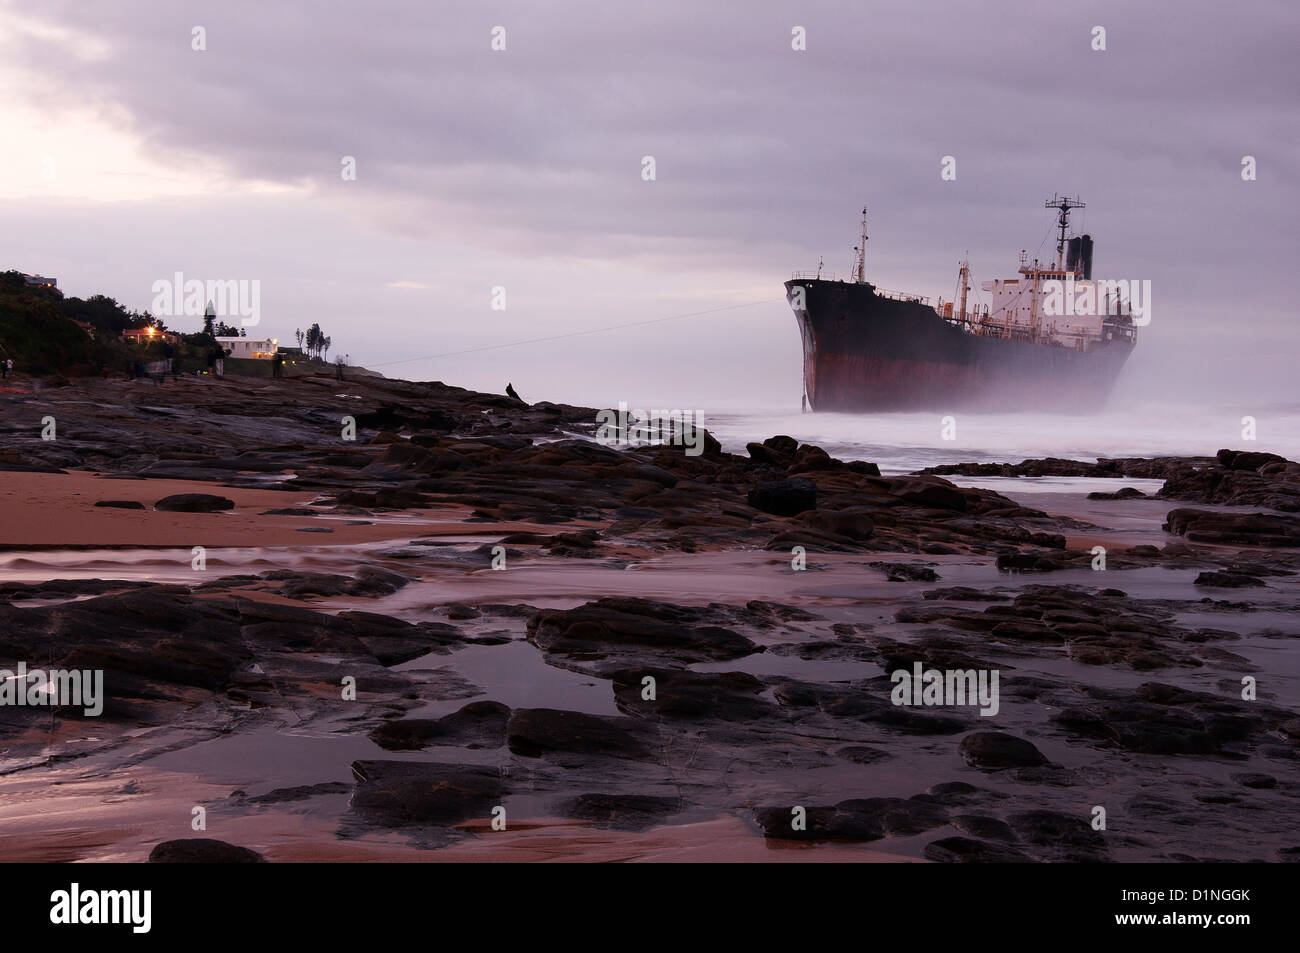 The Phoenix vessel which ran aground near Salt Rock after a cold front had passed through KZN resulting in adverse weather. Stock Photo